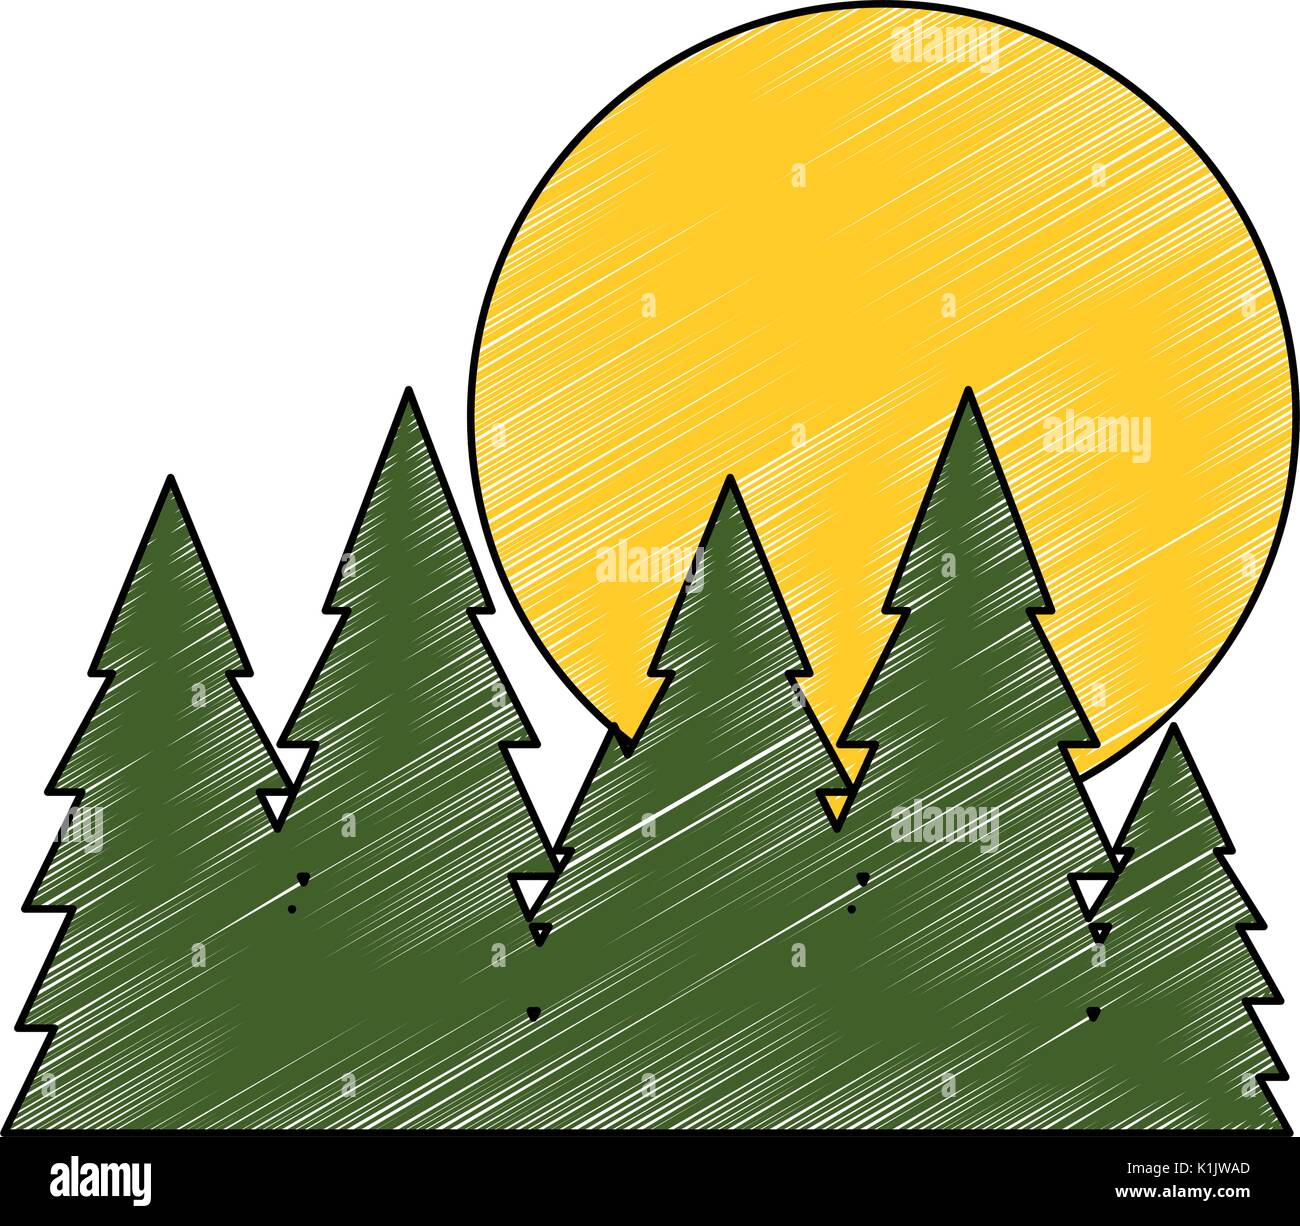 Tree pines isolated icon vector illustration graphic design Stock Vector